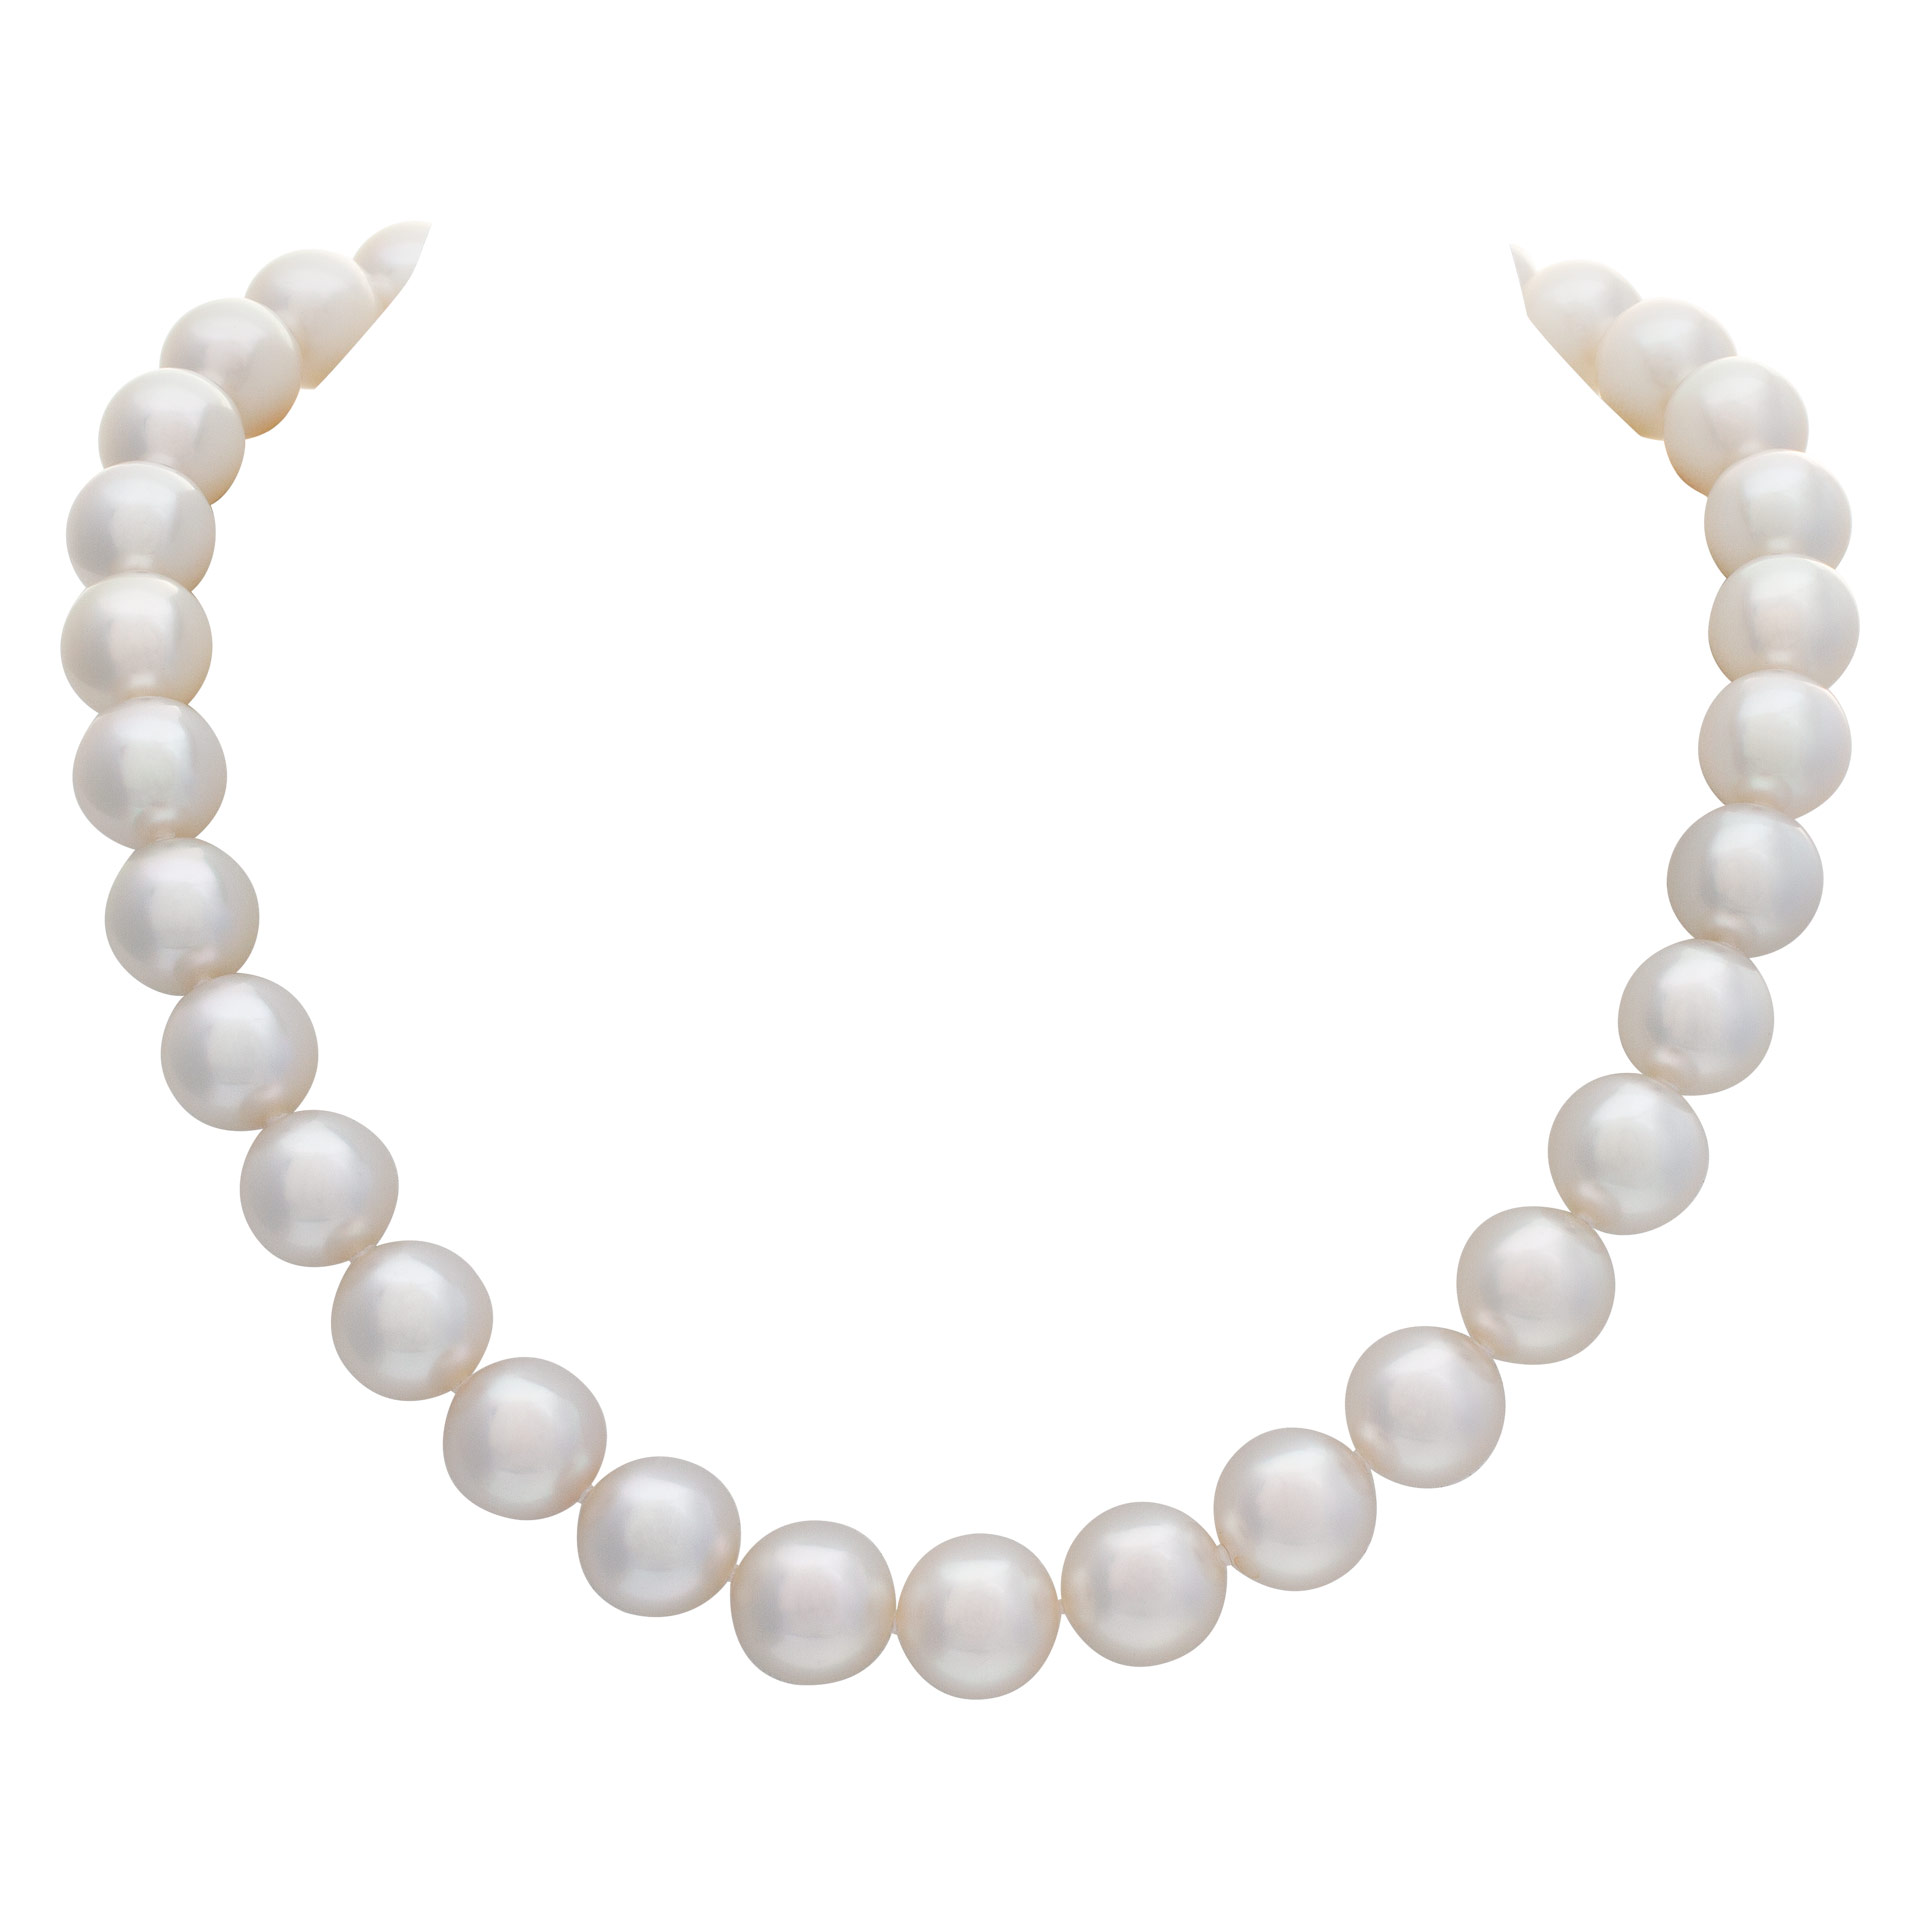 Mikimoto south sea pearl necklace with high grade, excellent luster, round shape pearls with very cl image 1